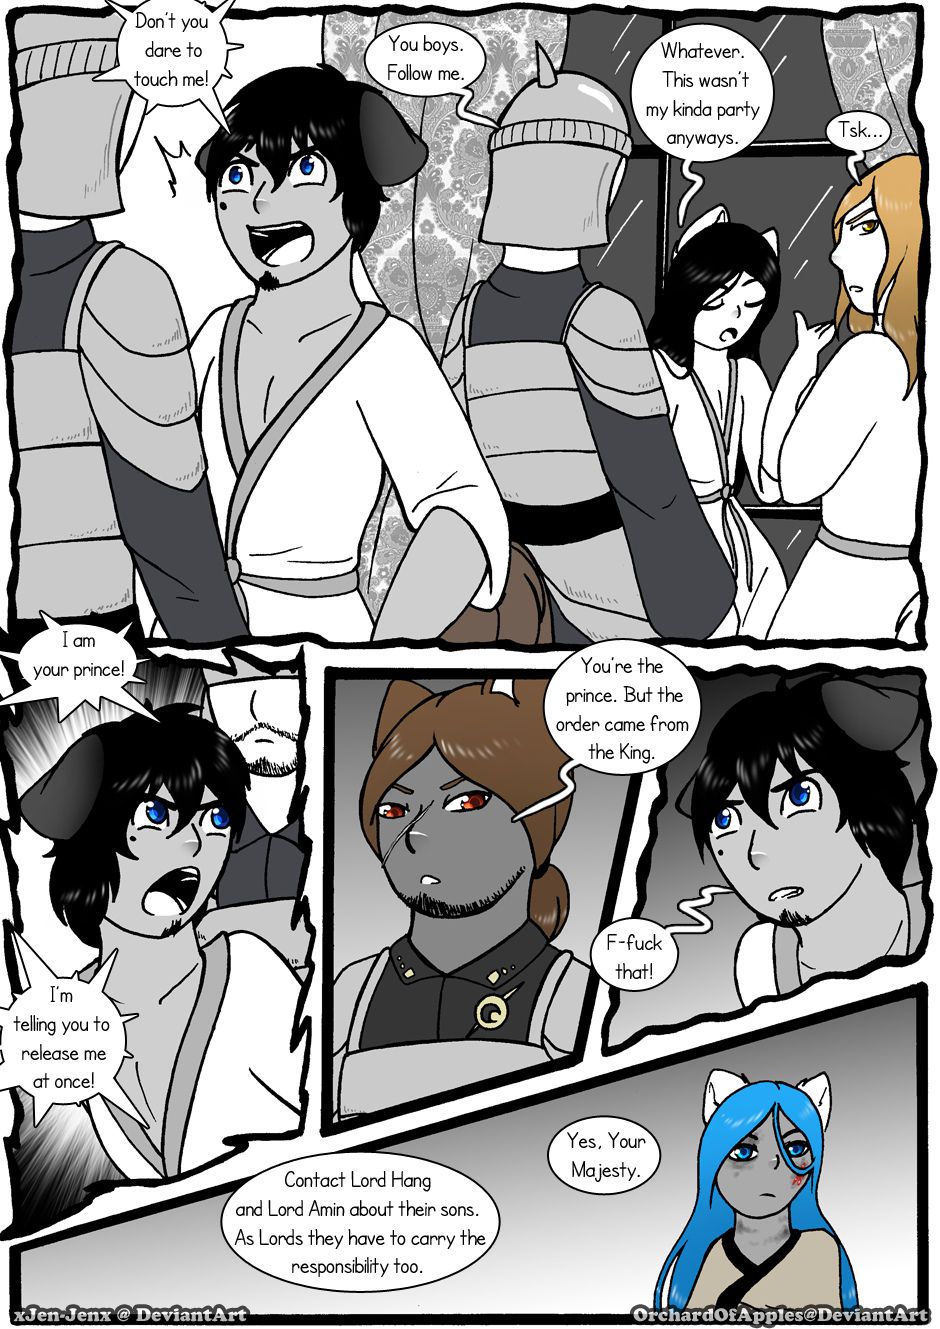 [Jeny-jen94] Between Kings and Queens [Ongoing] 173